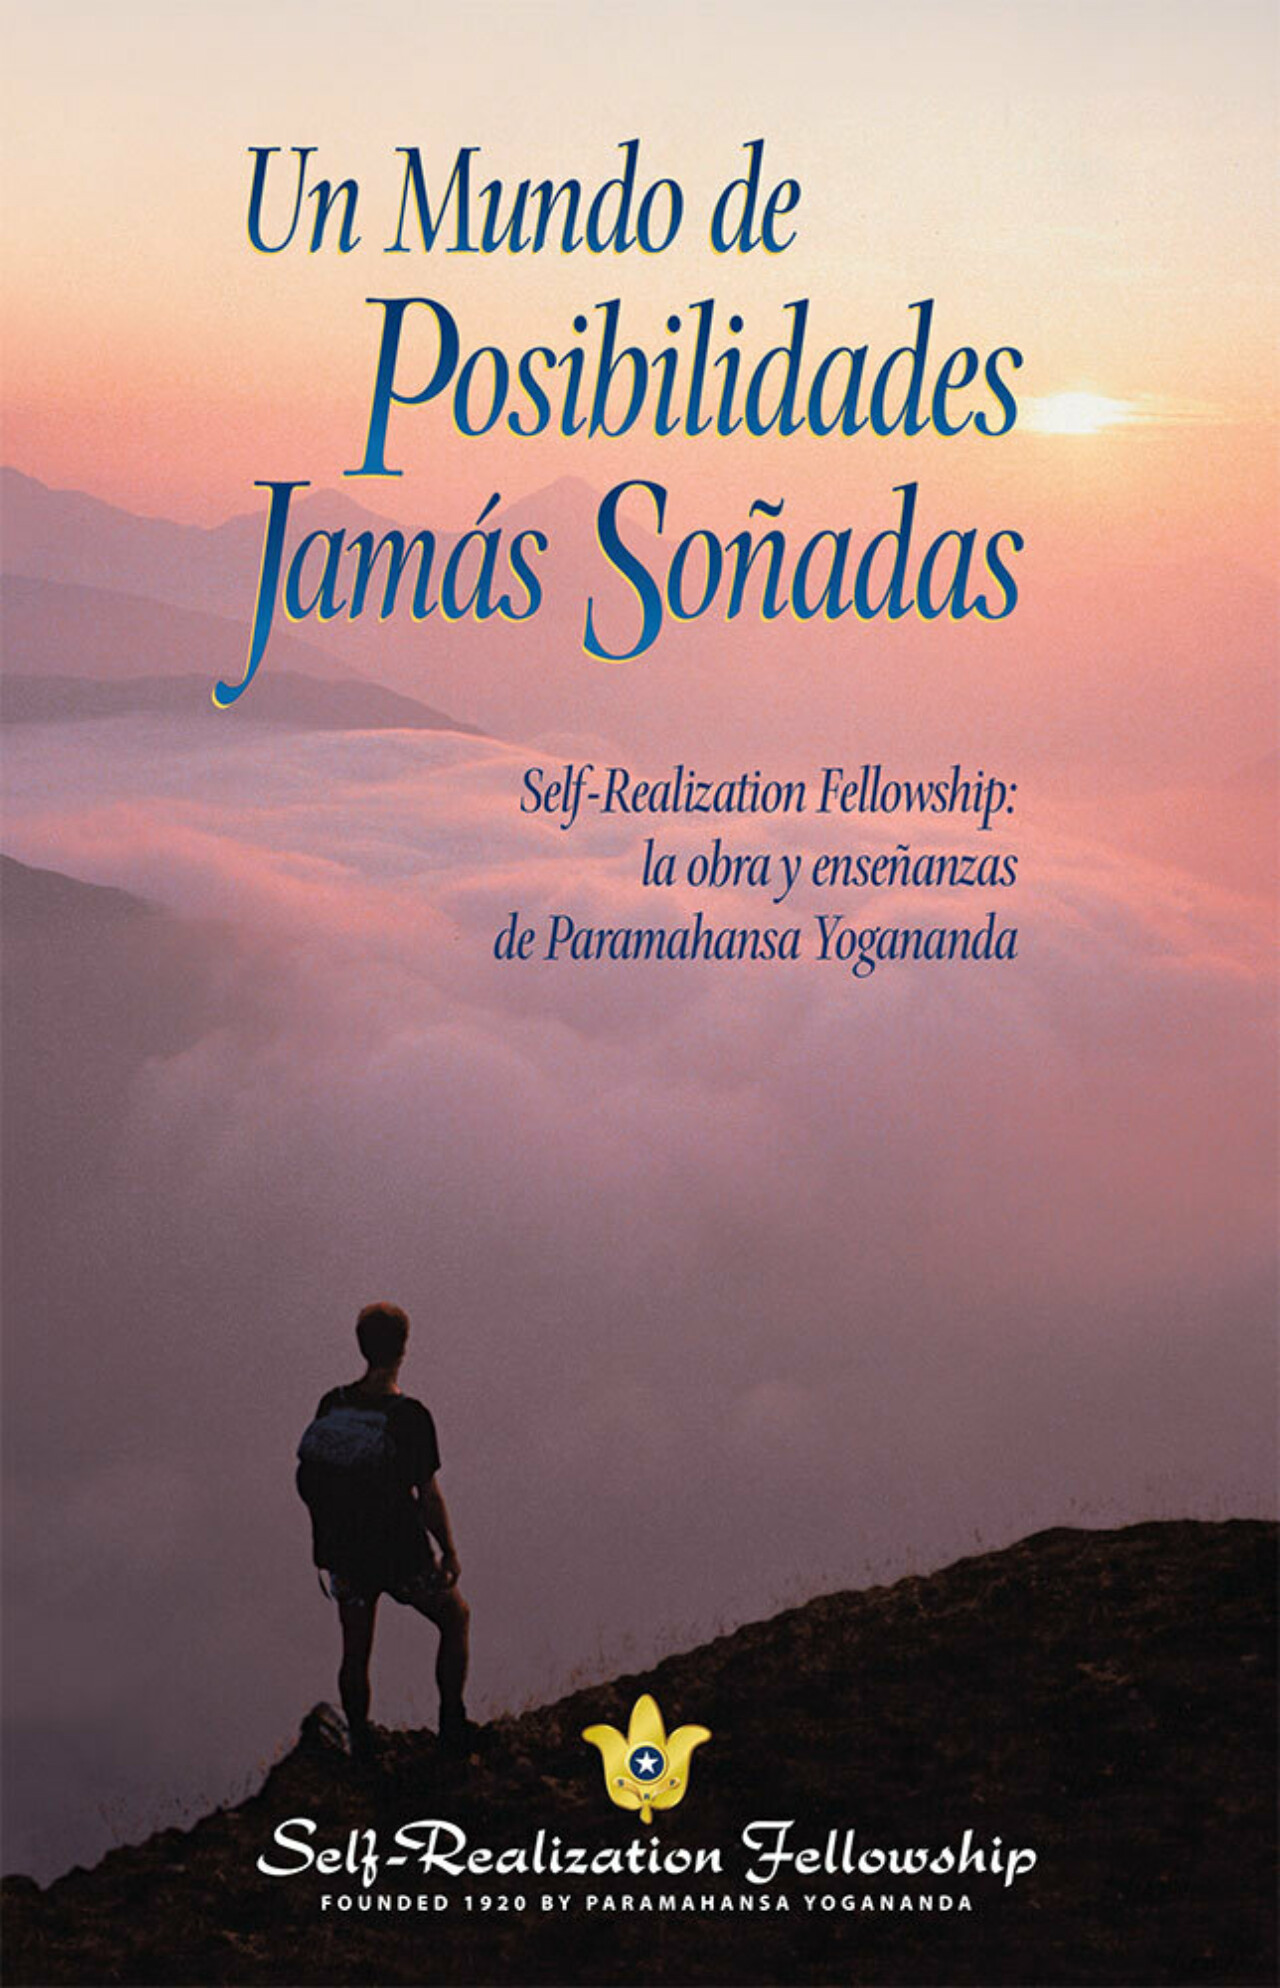 Undreamed of Possibilities Front Cover Spanish